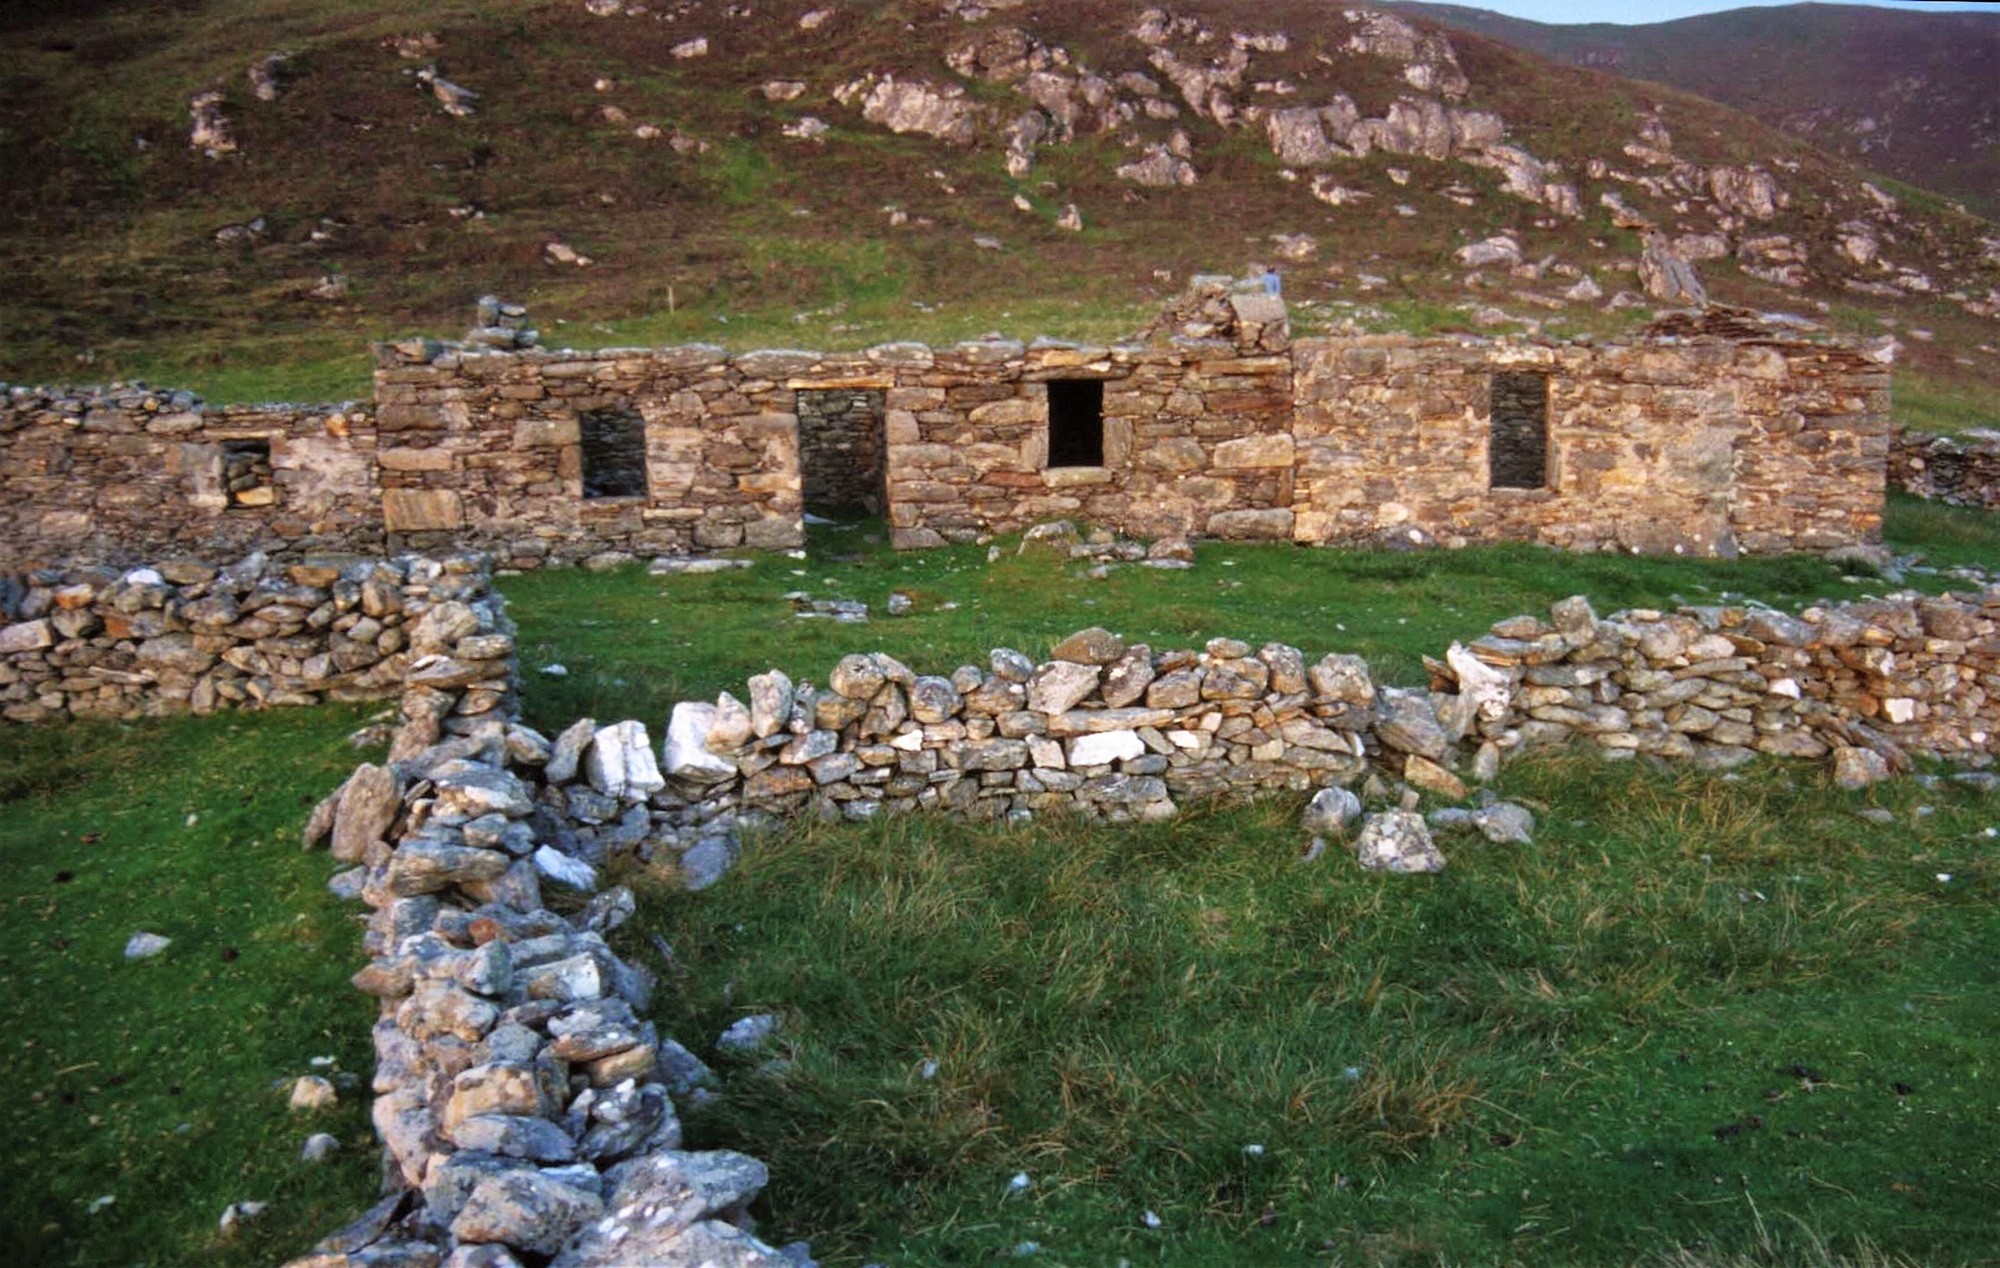 •	Bool, Collaster, Unst, last occupied in 1909 (Shetland Museum & Archives SL03105)